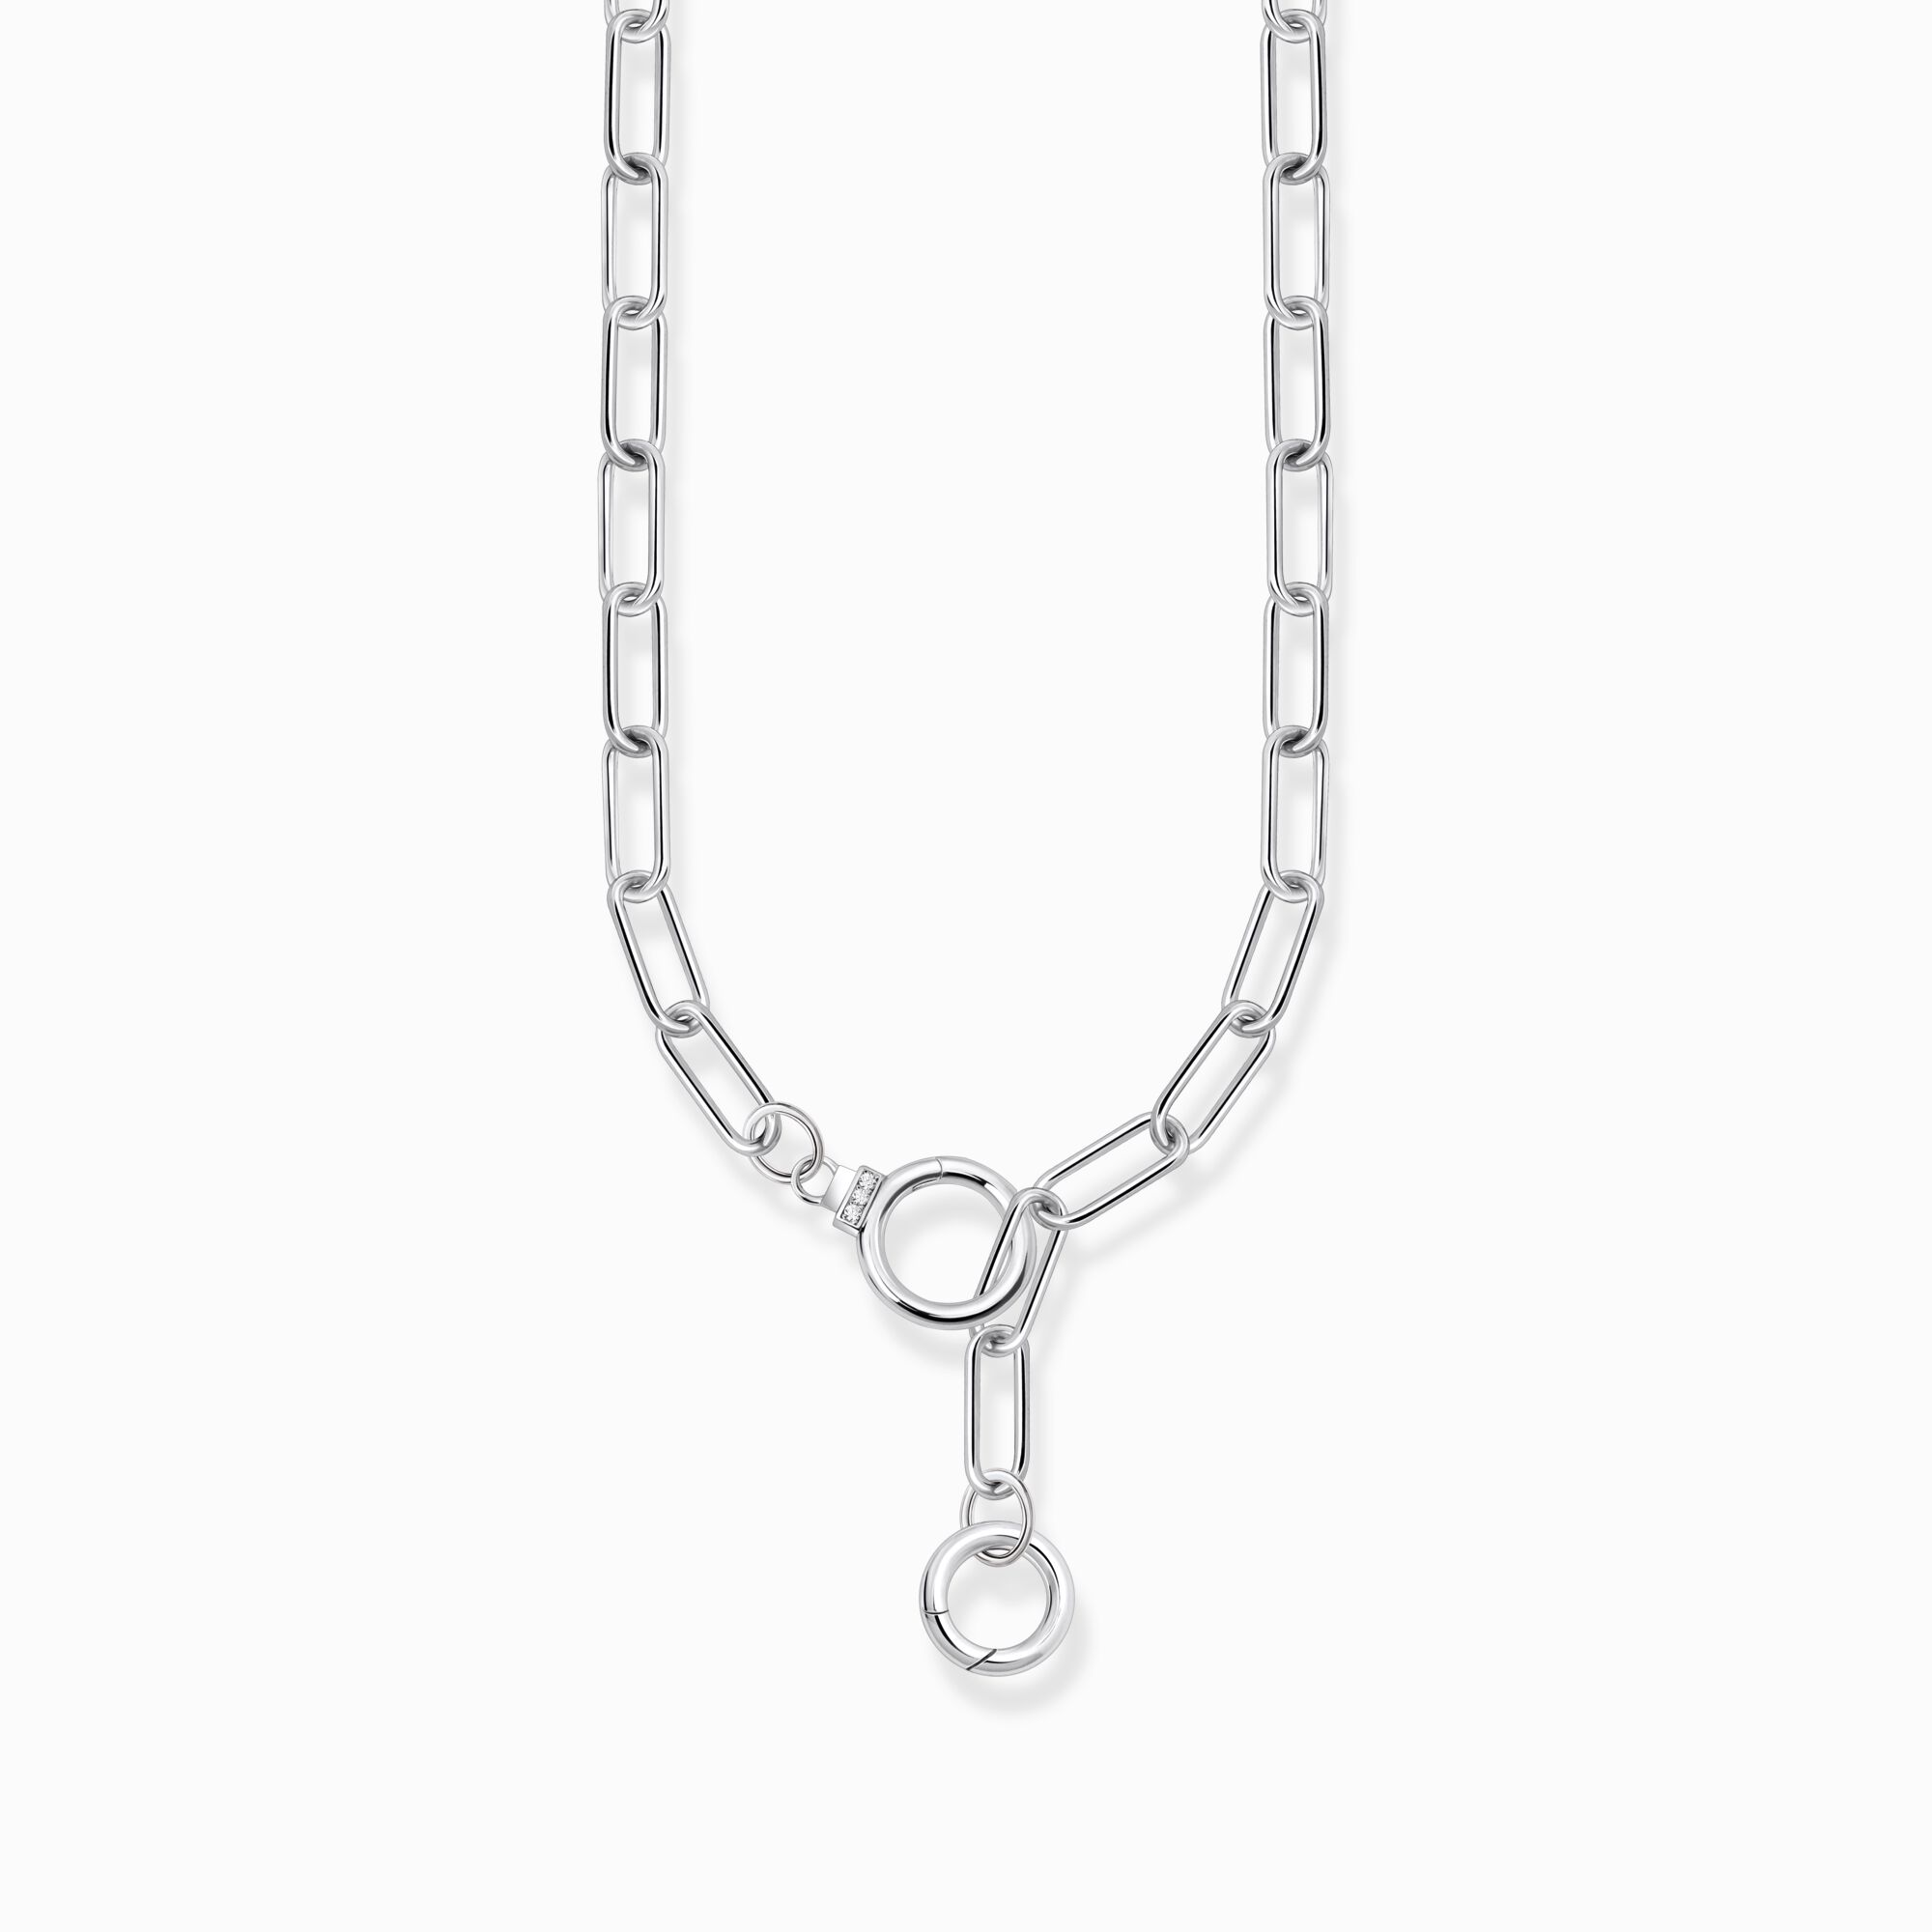 Silver link necklace with two ring clasps and white zirconia from the  collection in the THOMAS SABO online store